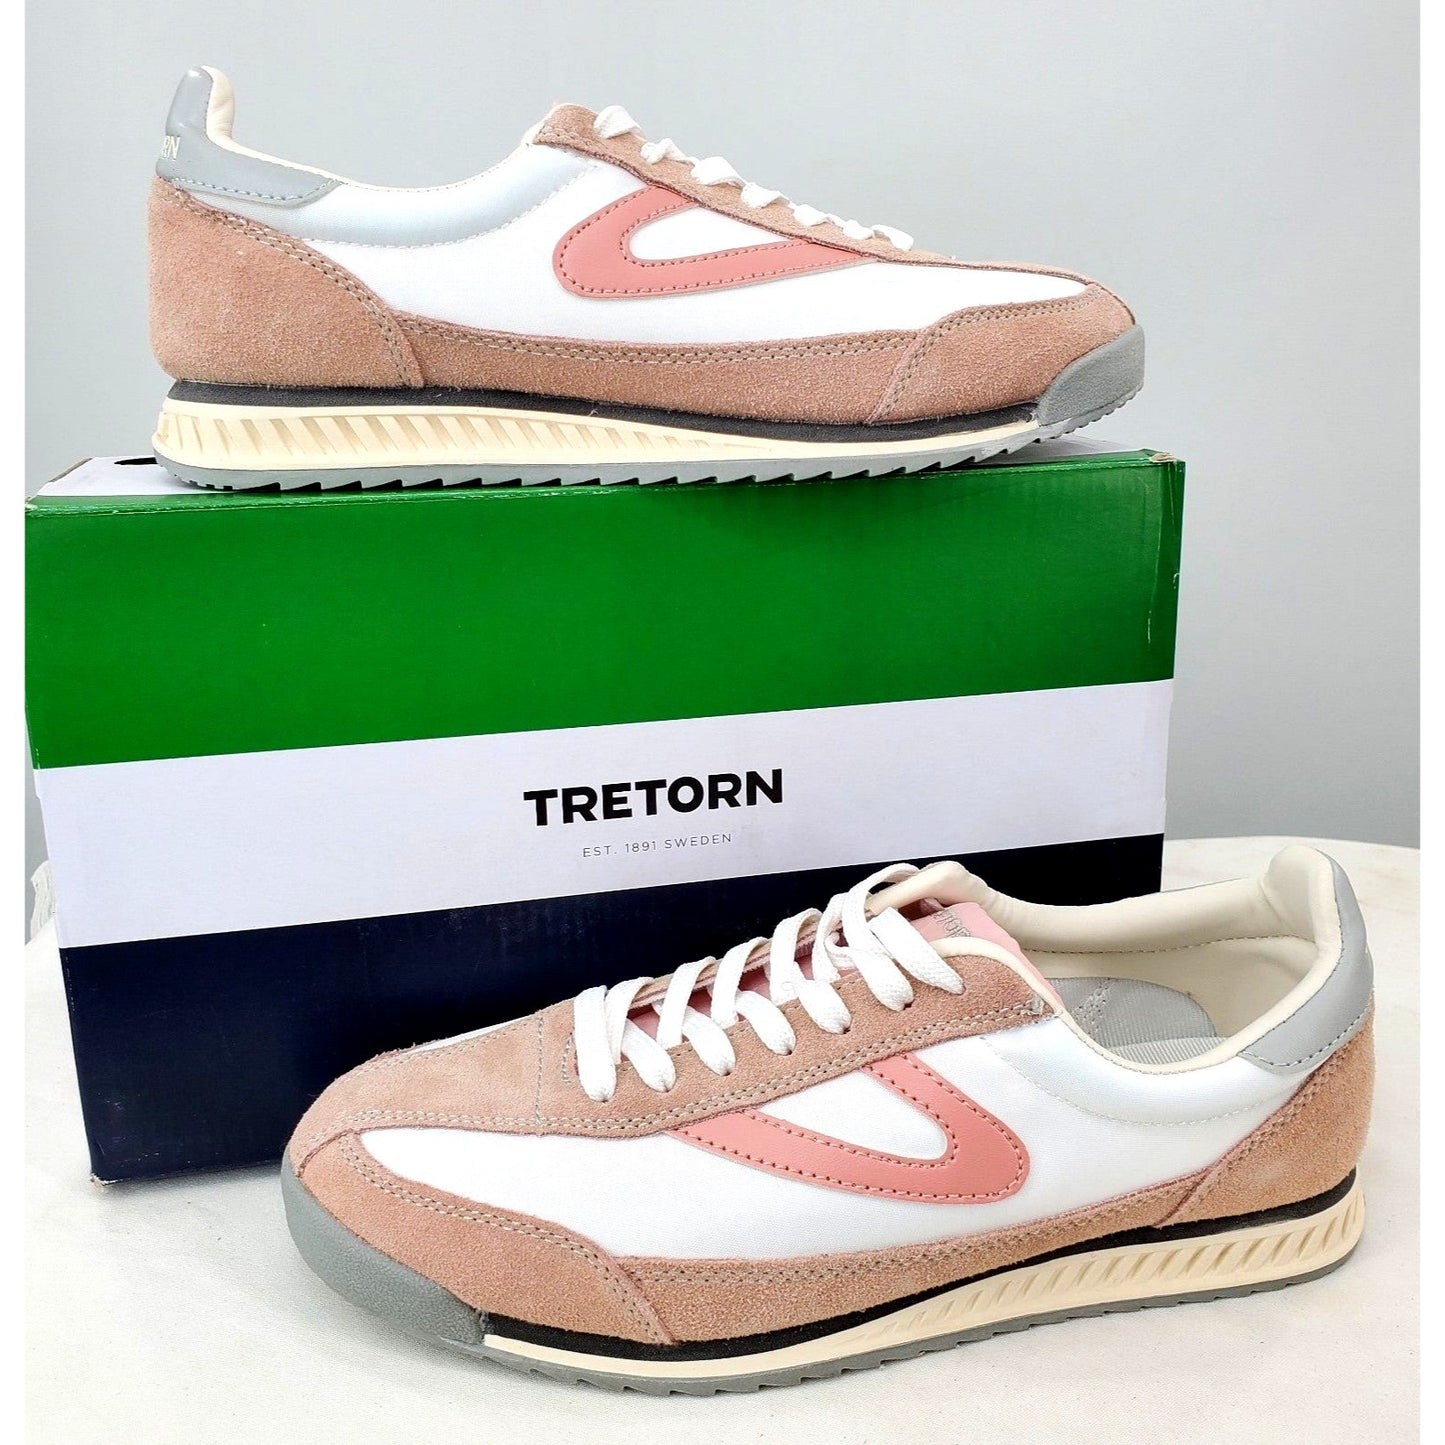 TRETORN Sneakers Women's Rawlins Lace-Up Casual Tennis Shoes Classic Retro